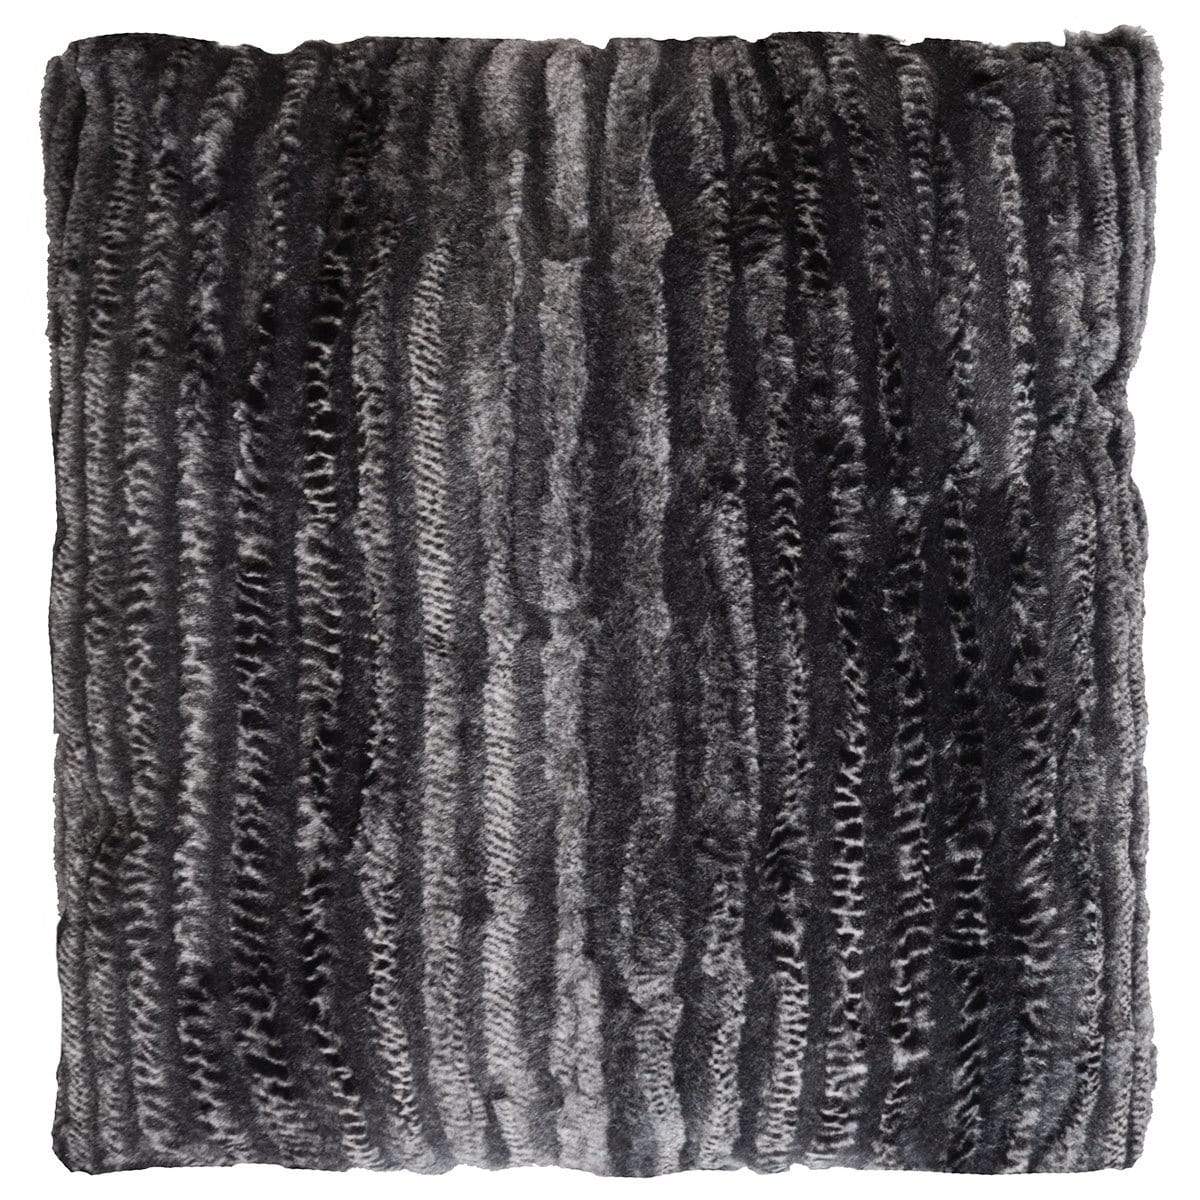 Pillow Shams in rattle 'n' Shake; snake print black and gray | Luxury Faux Fur decorative pillow | Handmade by Pandemonium Millinery